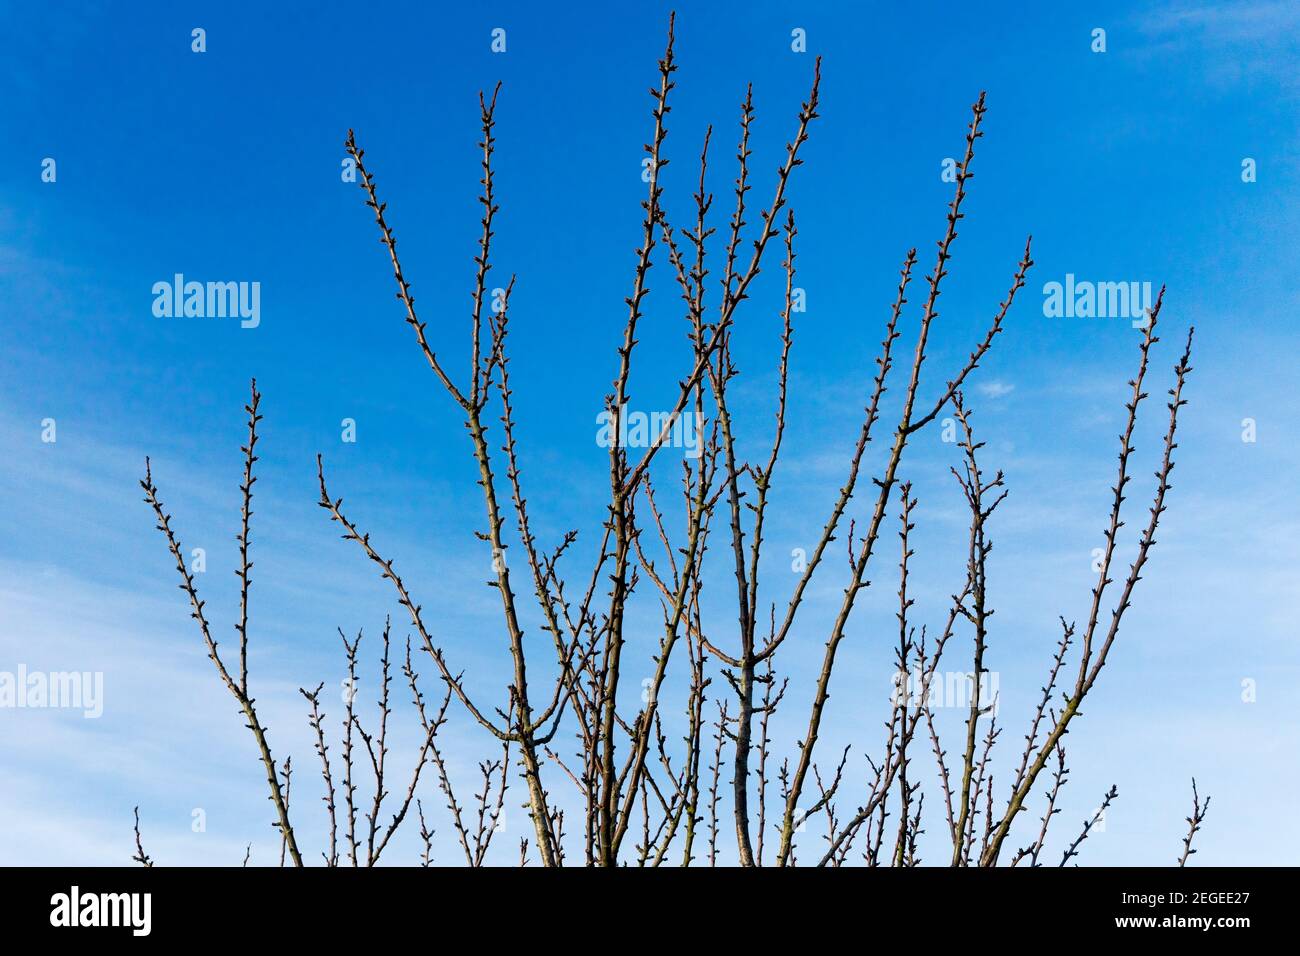 Buds appearing on a greengage tree against a blue sky.  An early sign of spring. Stock Photo